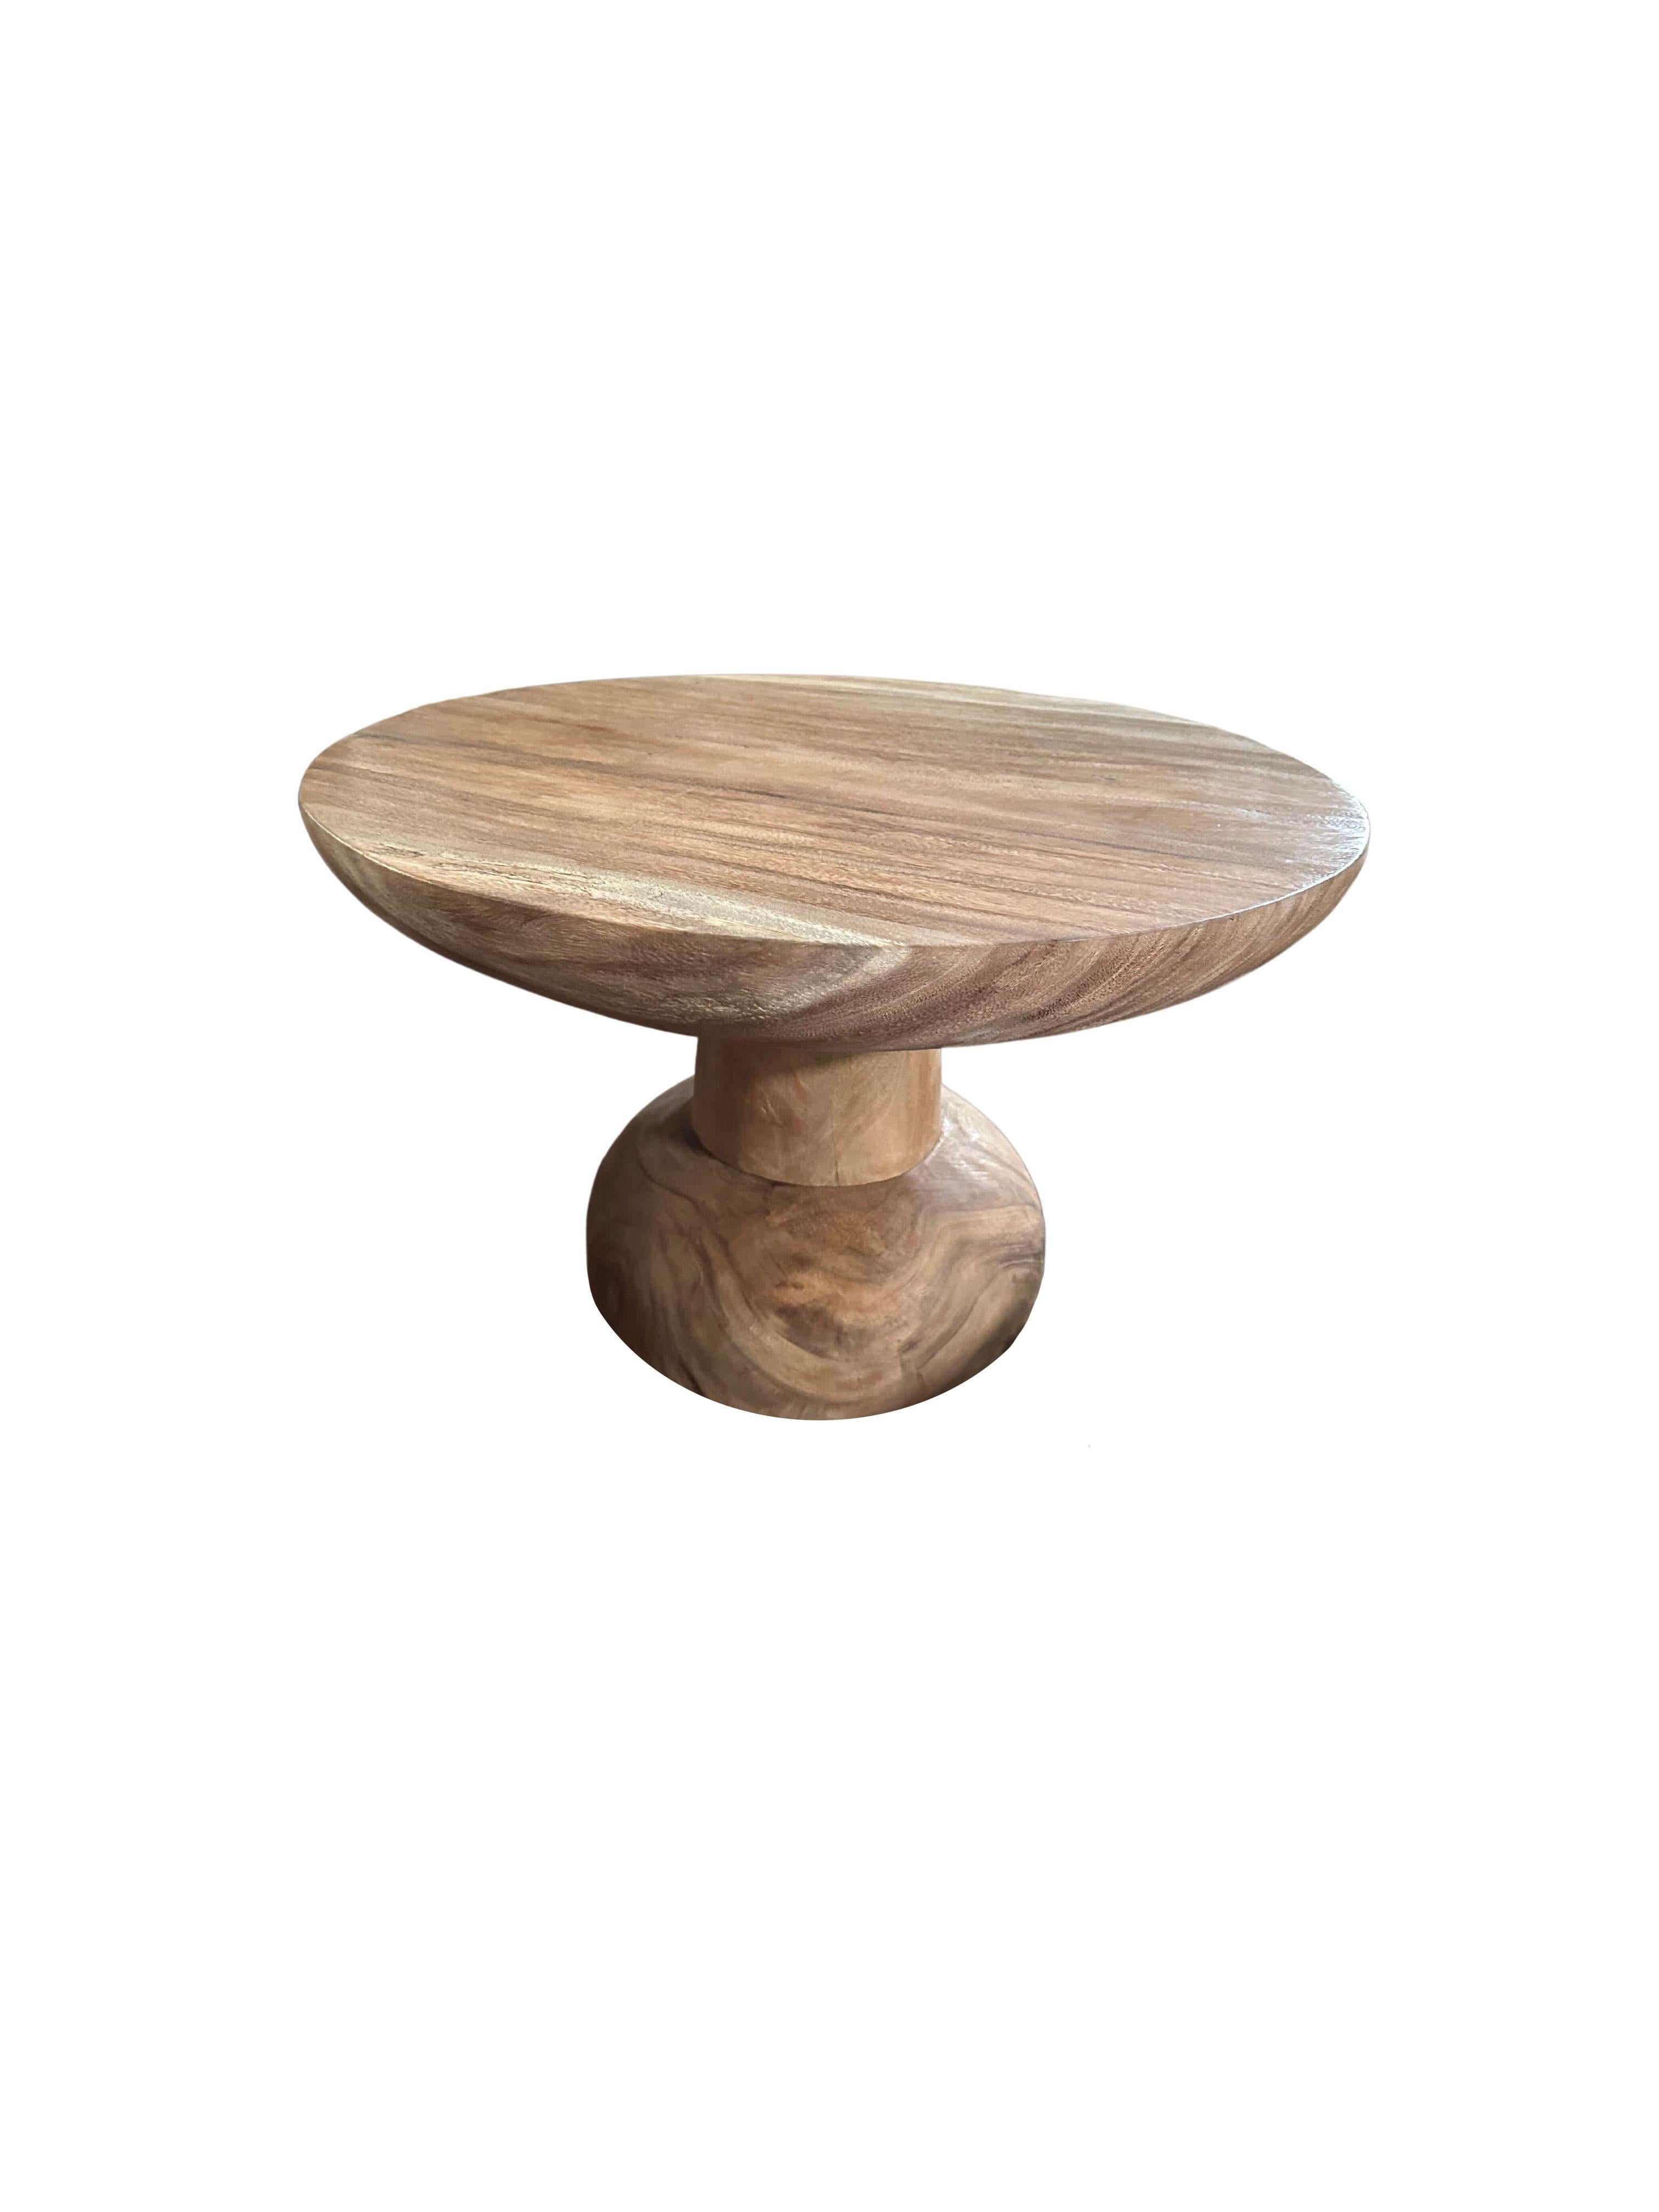 Hand-Crafted Sculptural Round Table Suar Wood, Modern Organic For Sale